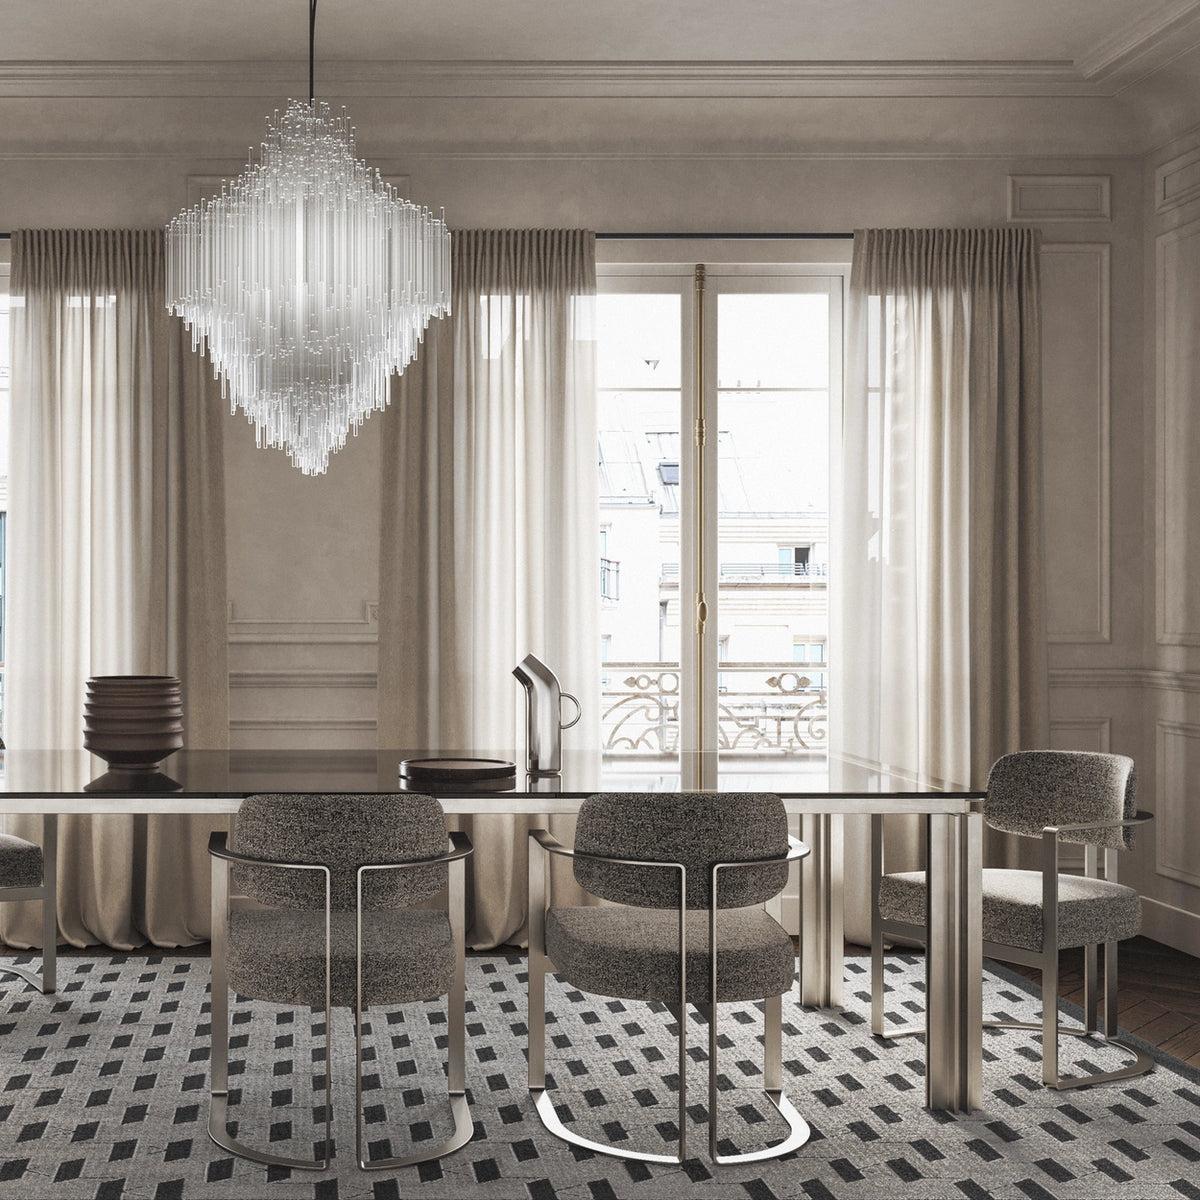 Karl Lagerfeld Maison launches a luxury furniture collection